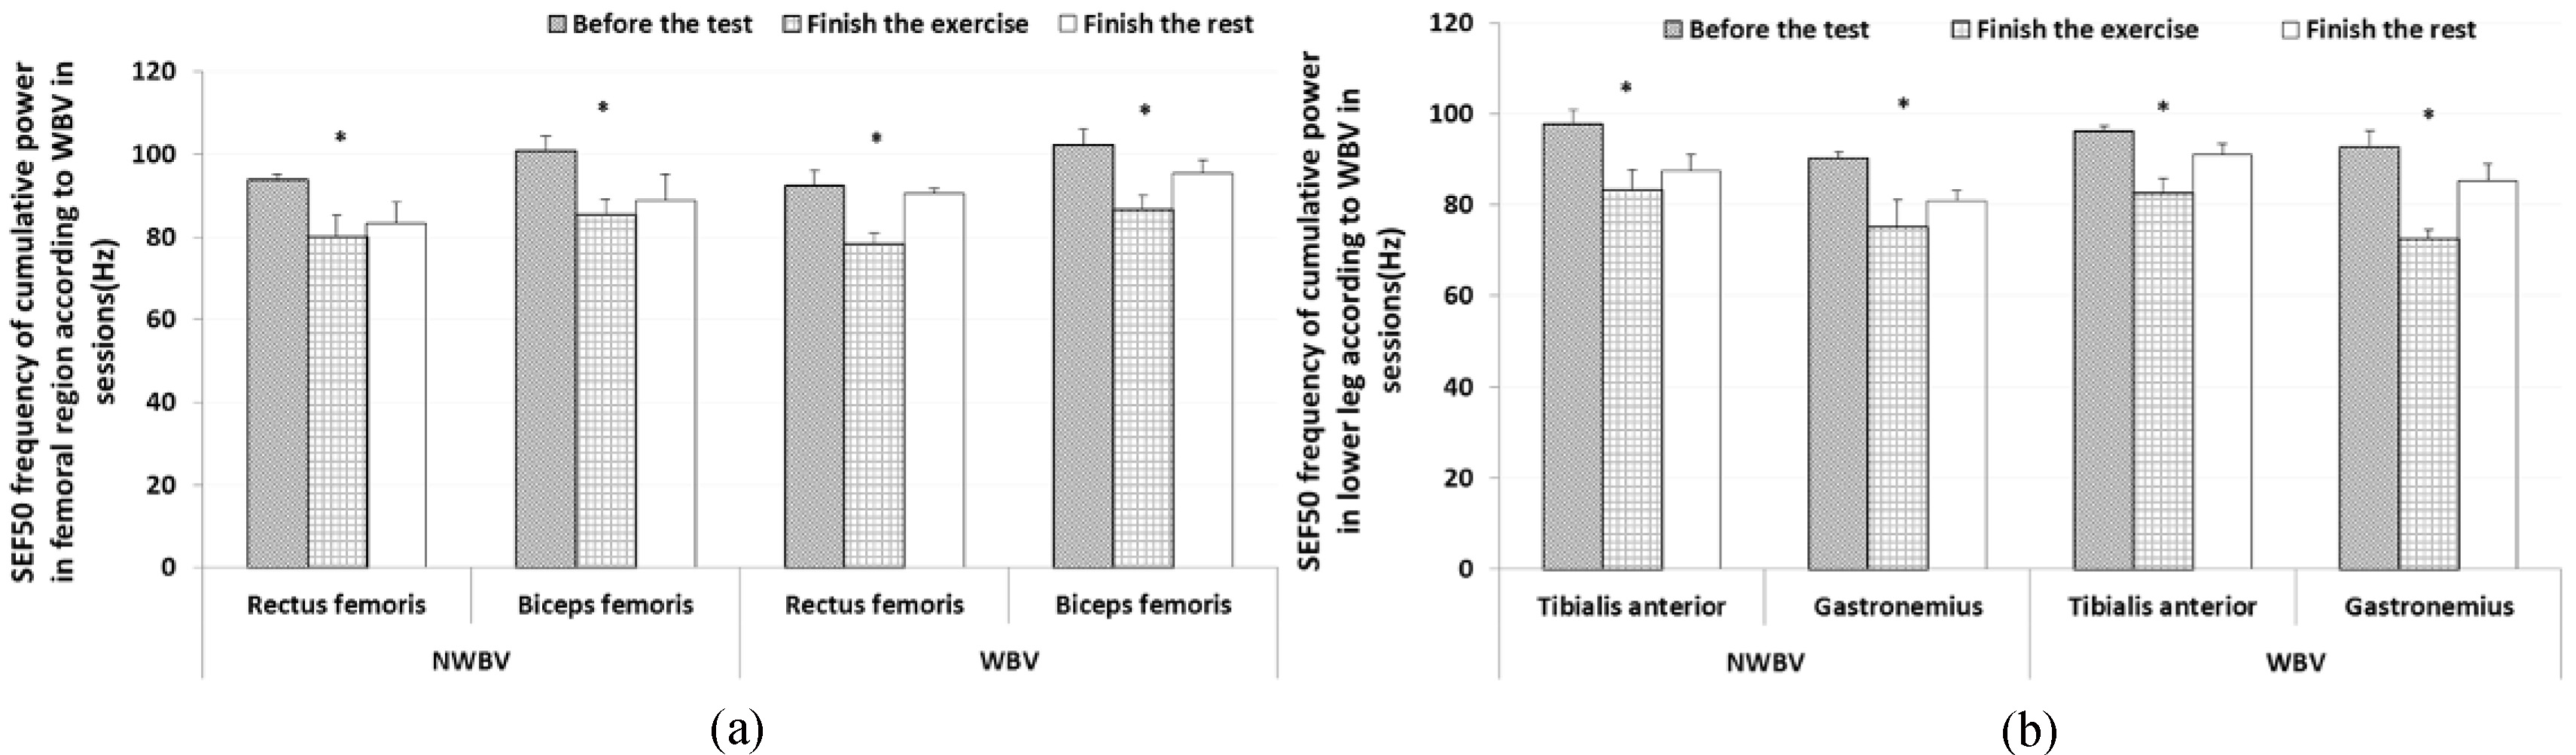 Results of SEF 50 frequency of cumulative power for observing muscle fatigue according to WBV (mean ± SD, *p< 0.05) : (a) Femoral muscles, (b) Lower leg muscles.